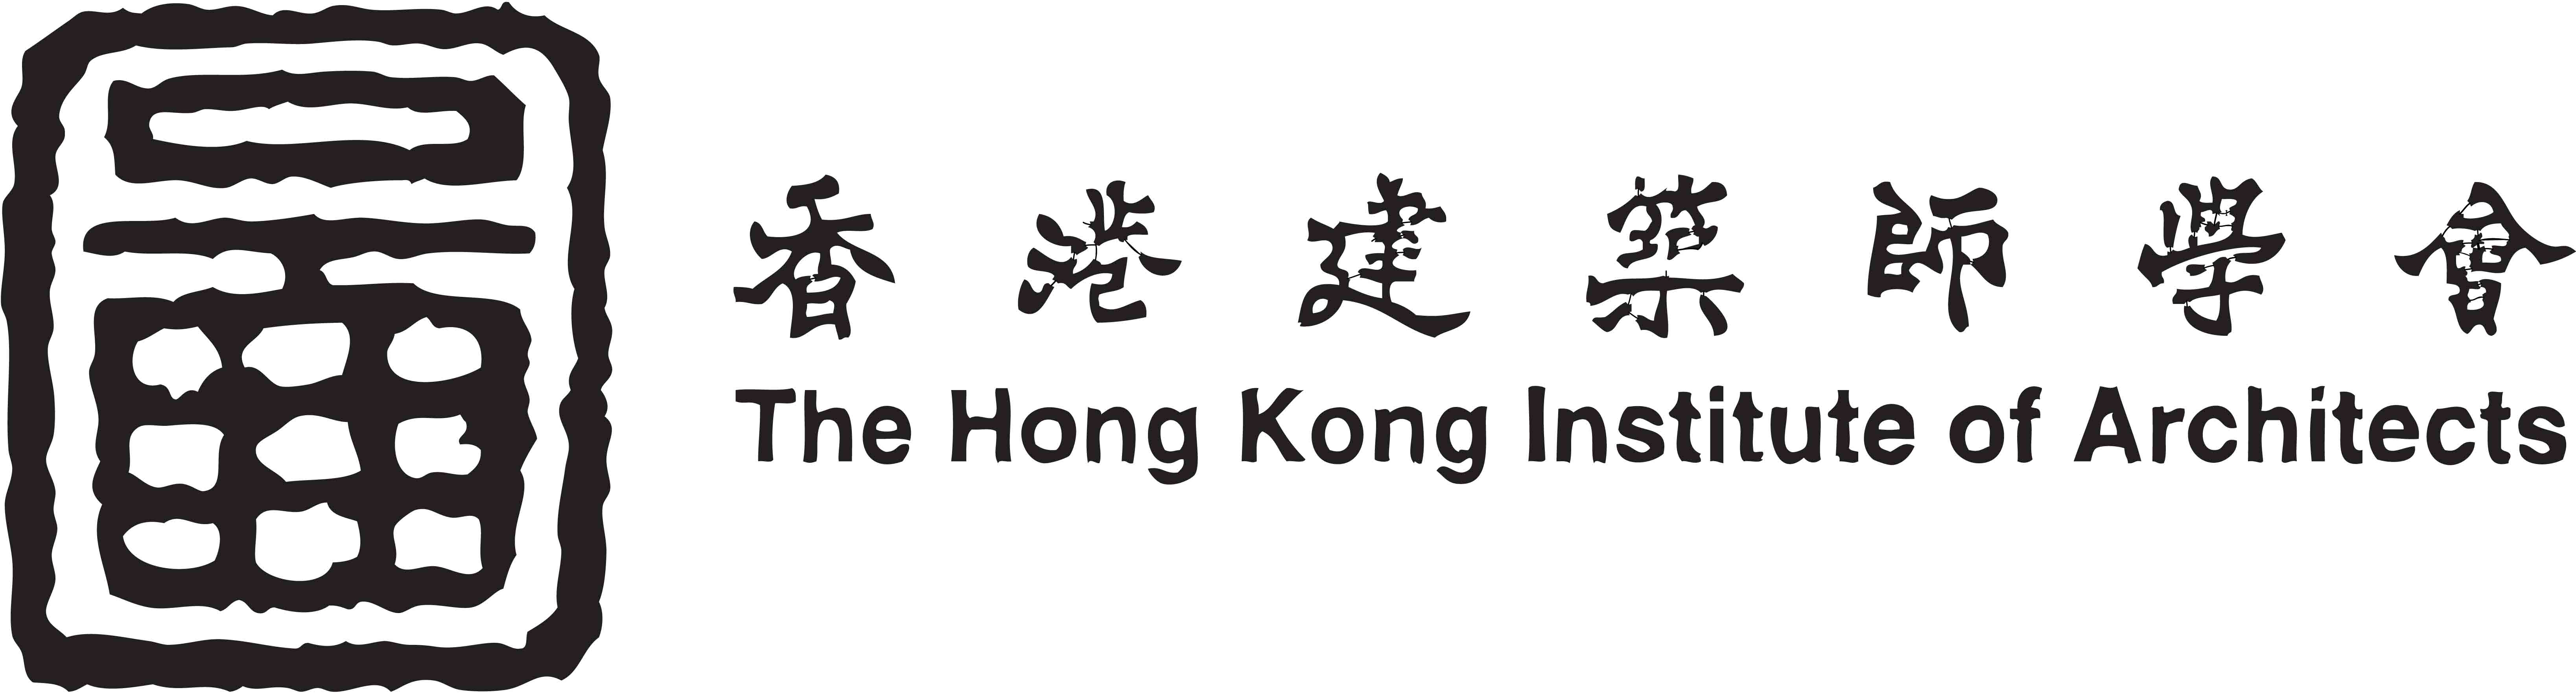 Hong Kong Institute of Architects